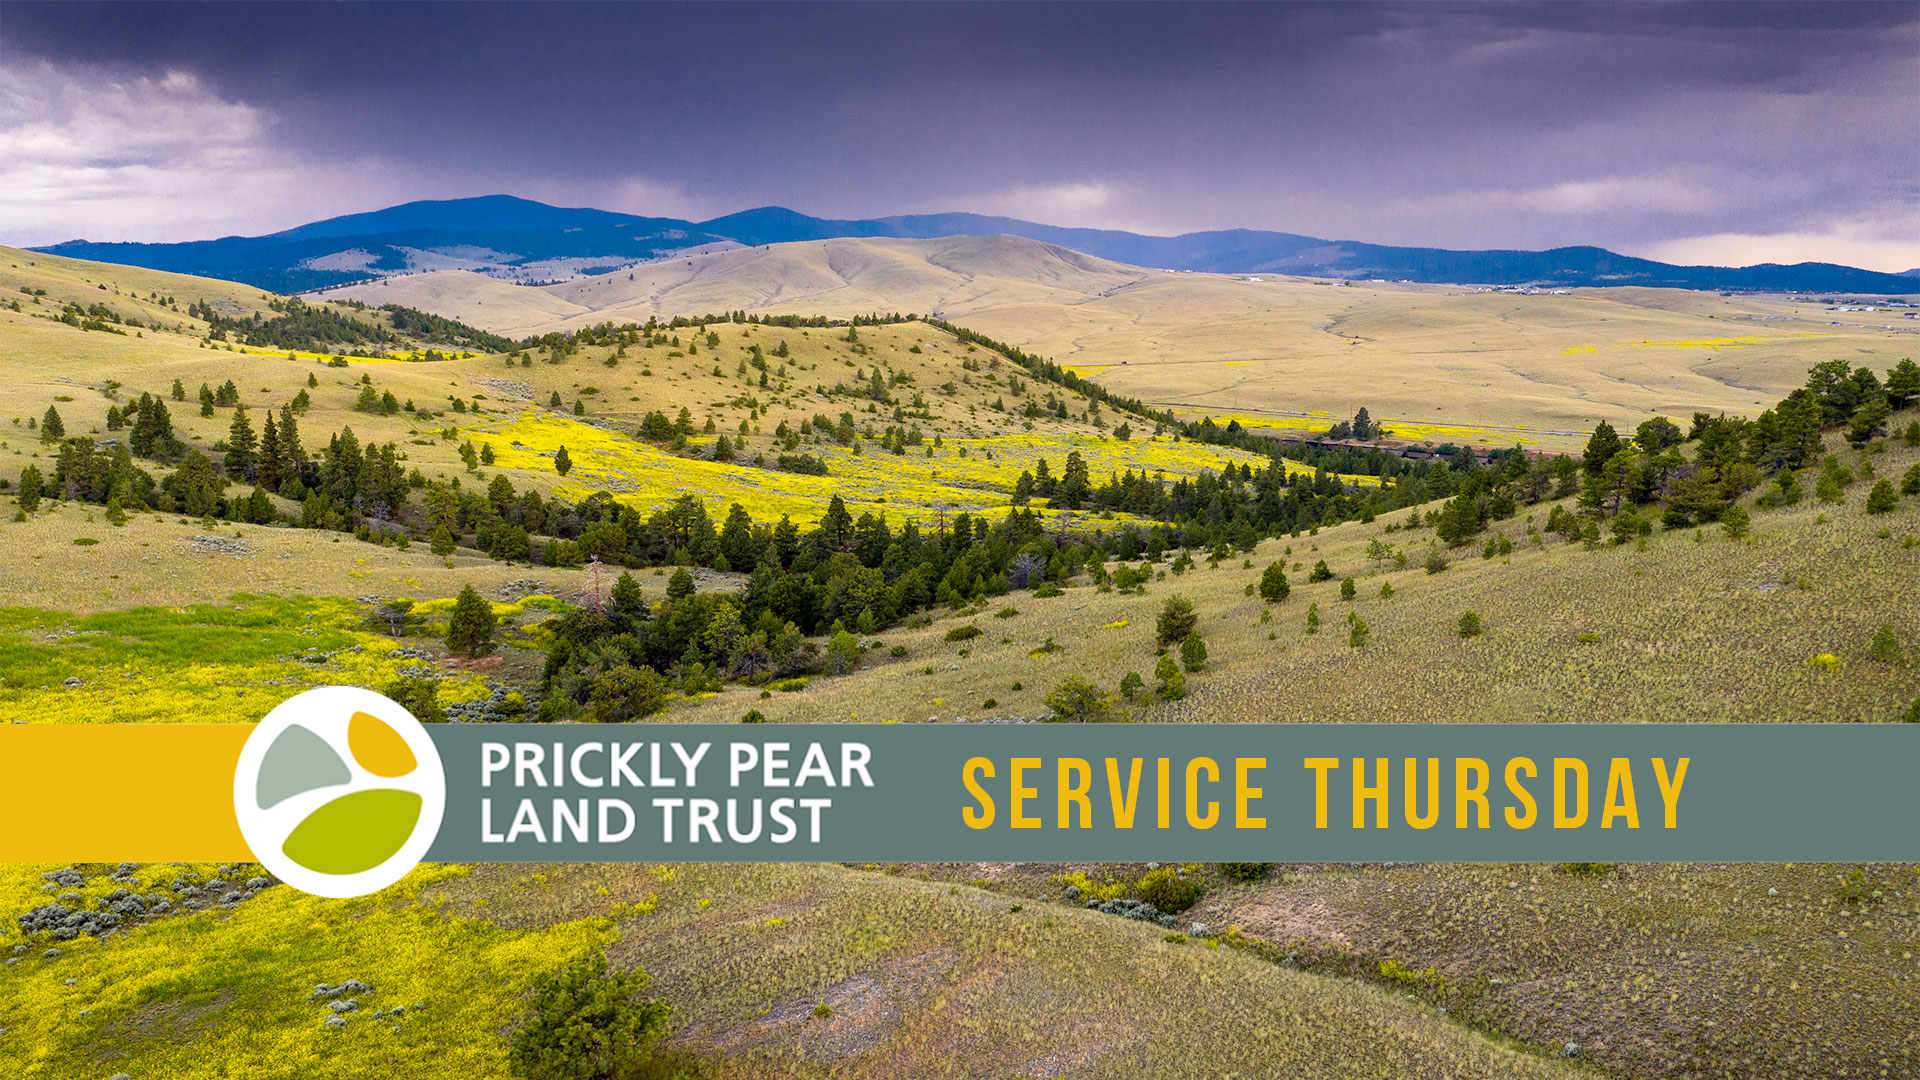 Service Thursday with Prickly Pear Land Trust